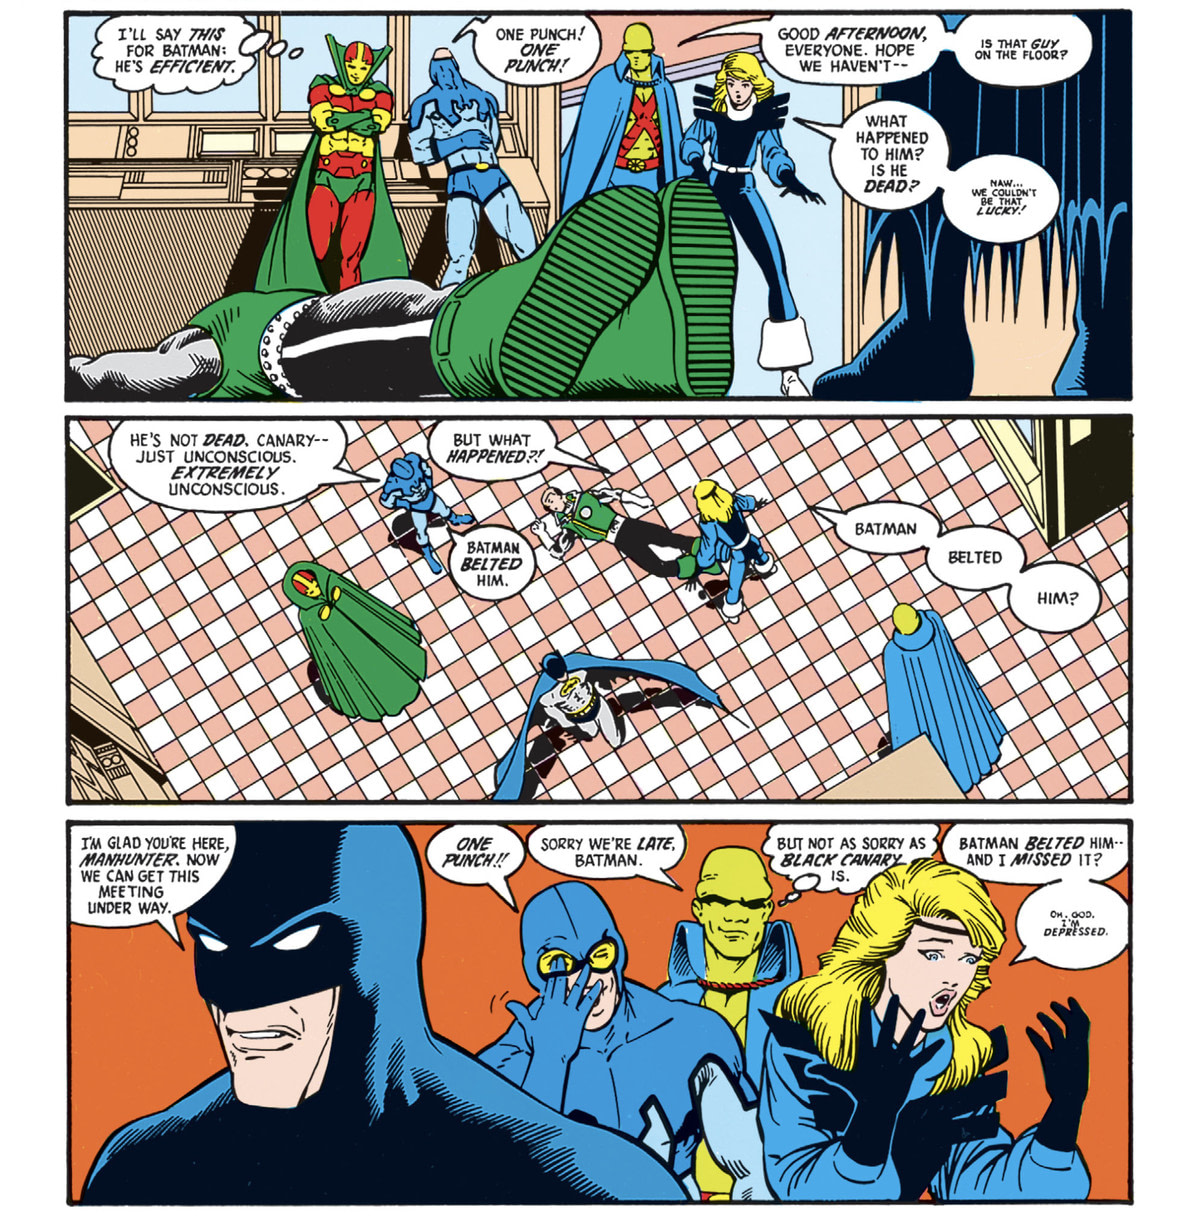 The Justice League reacts to Guy Gardner’s prone form on the floor, after he was hit with one Batman punch. Blue Beetle is in hysterics. Mister Miracle admits it was efficient. Black Canary is in disbelief and shock that she walked in too late to see it happen. Batman grimly calls them to order. 